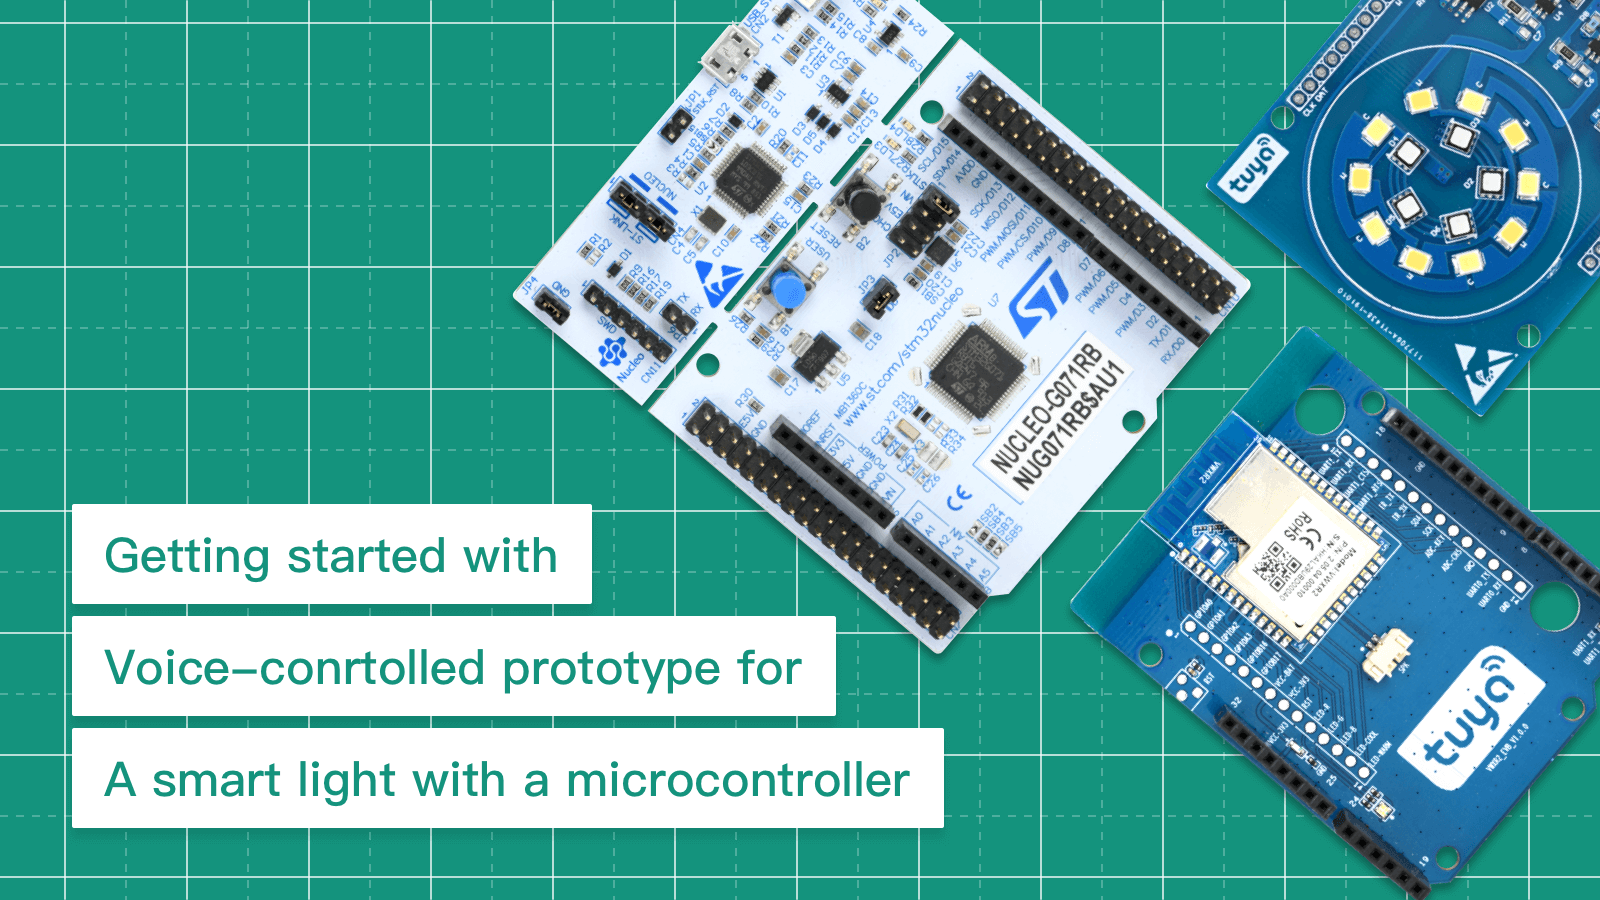 Top 10 hardware prototyping kits (continued) : Makery